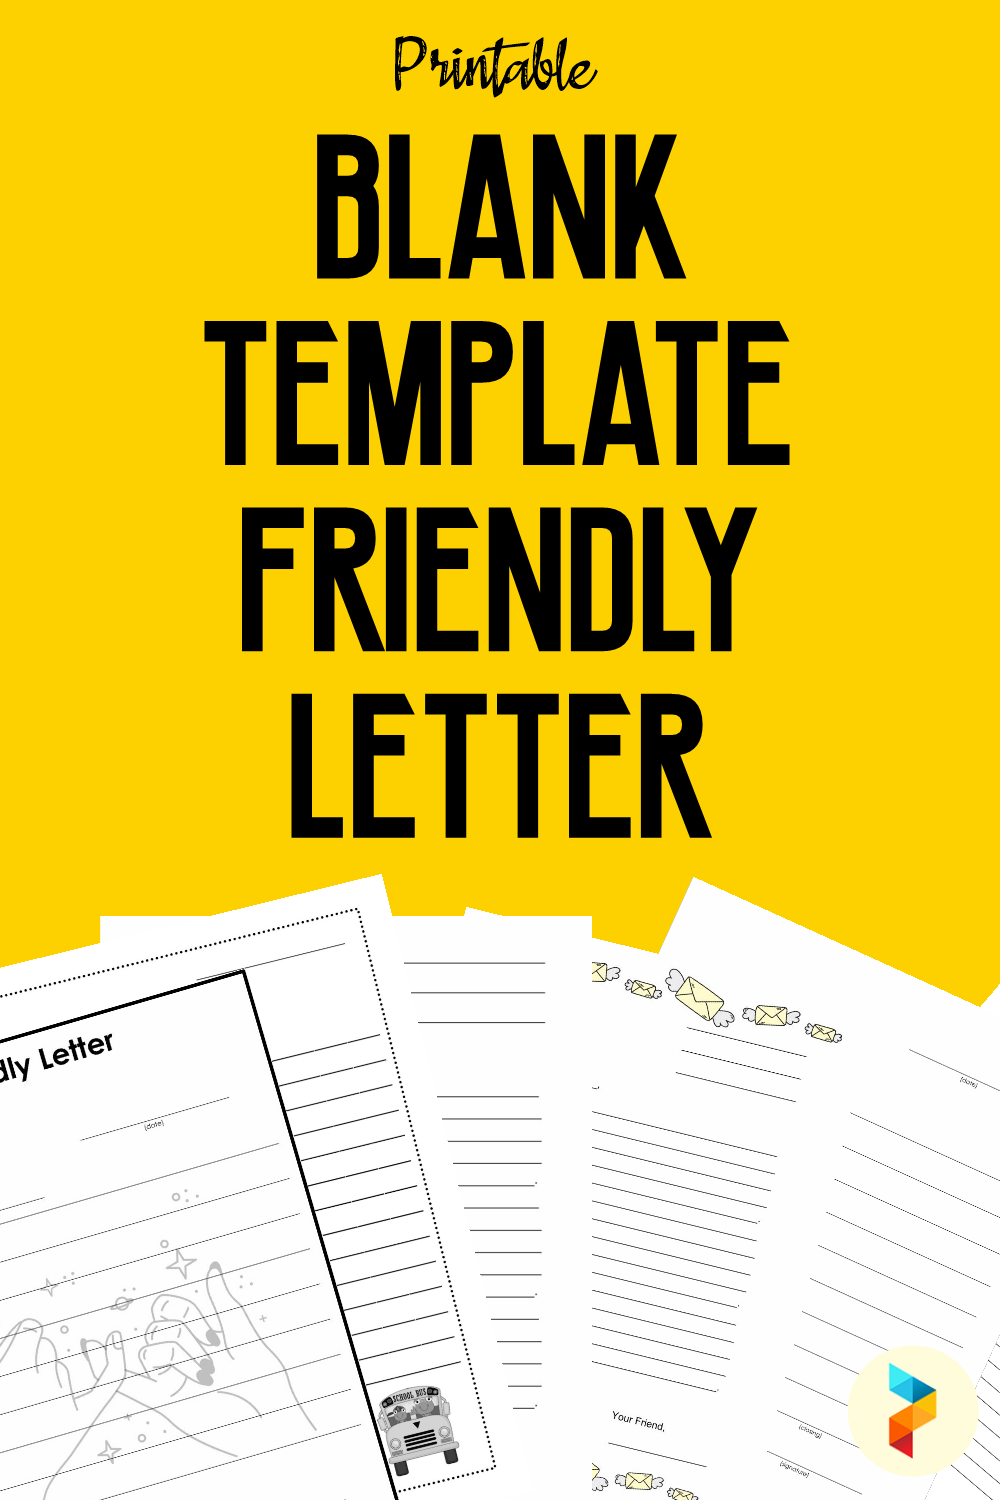 Printable Friendly Letter Form Printable Forms Free Online